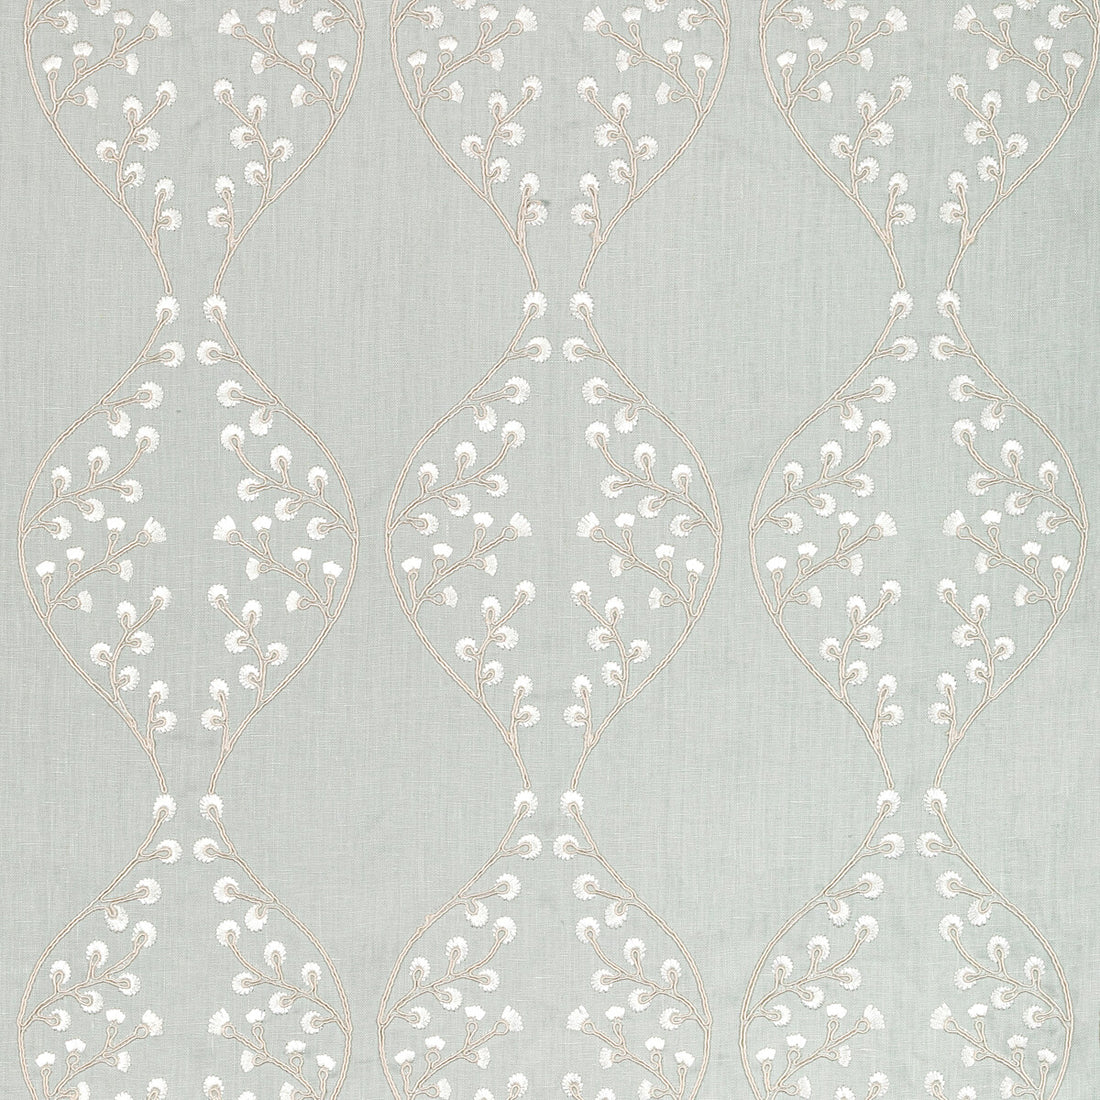 Lillie Embroidery fabric in aqua color - pattern 2021129.13.0 - by Lee Jofa in the Summerland collection